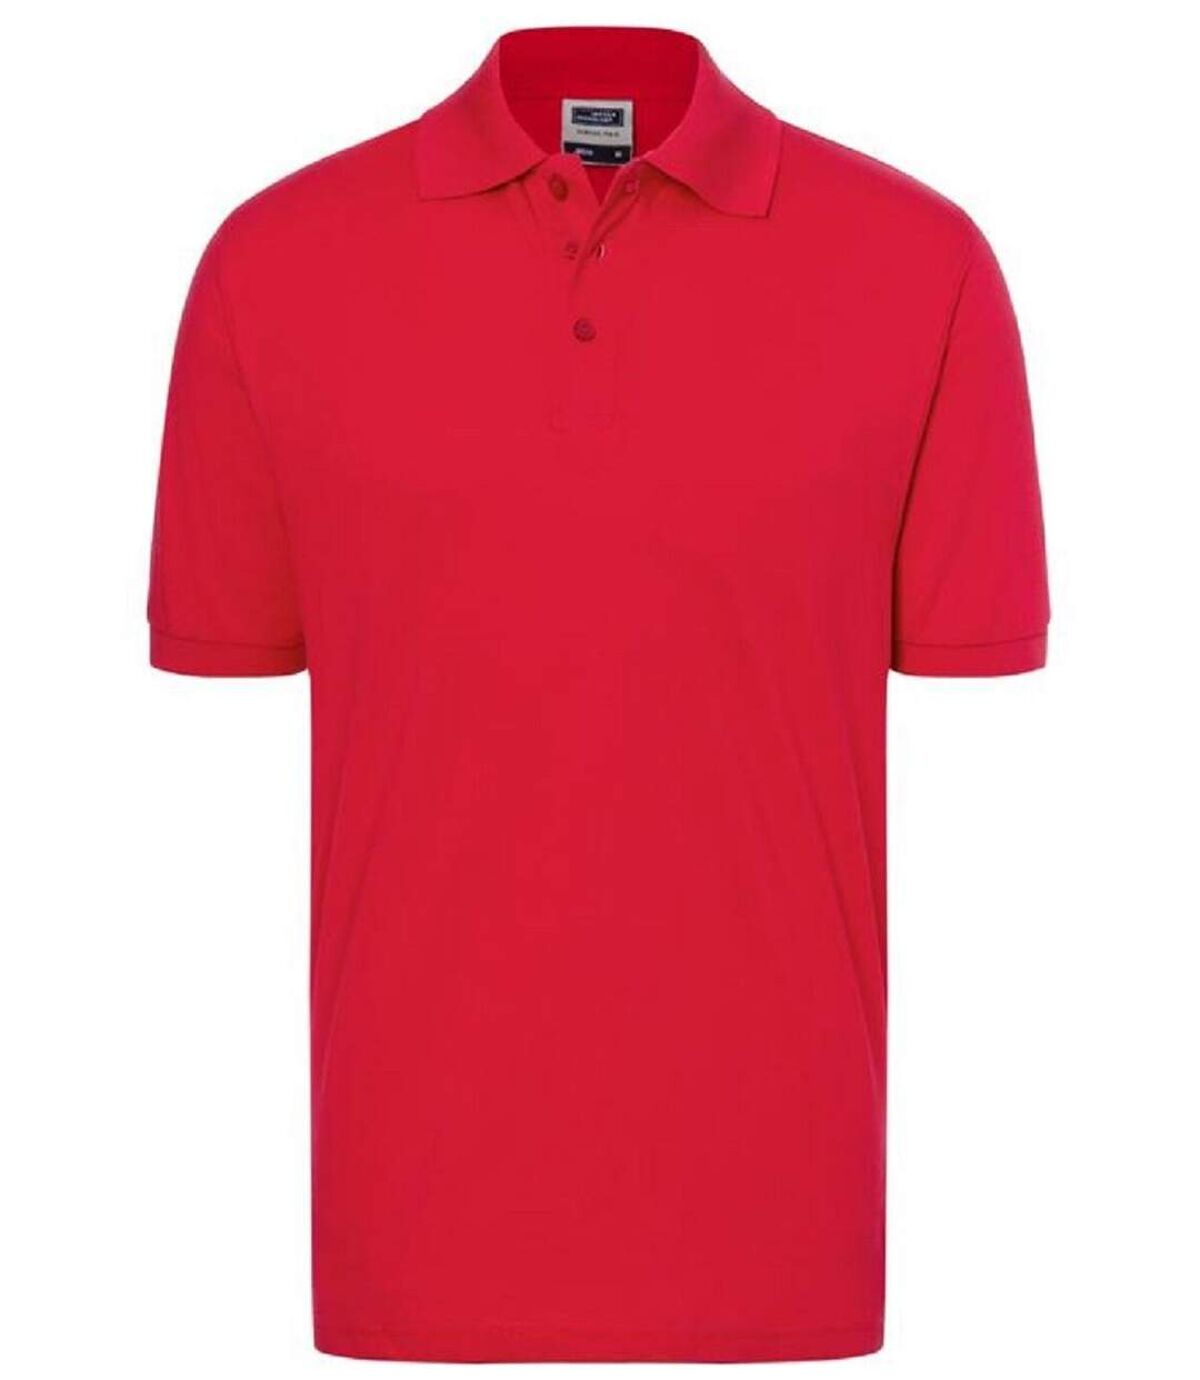 Polo manches courtes - Homme - JN070C - rouge